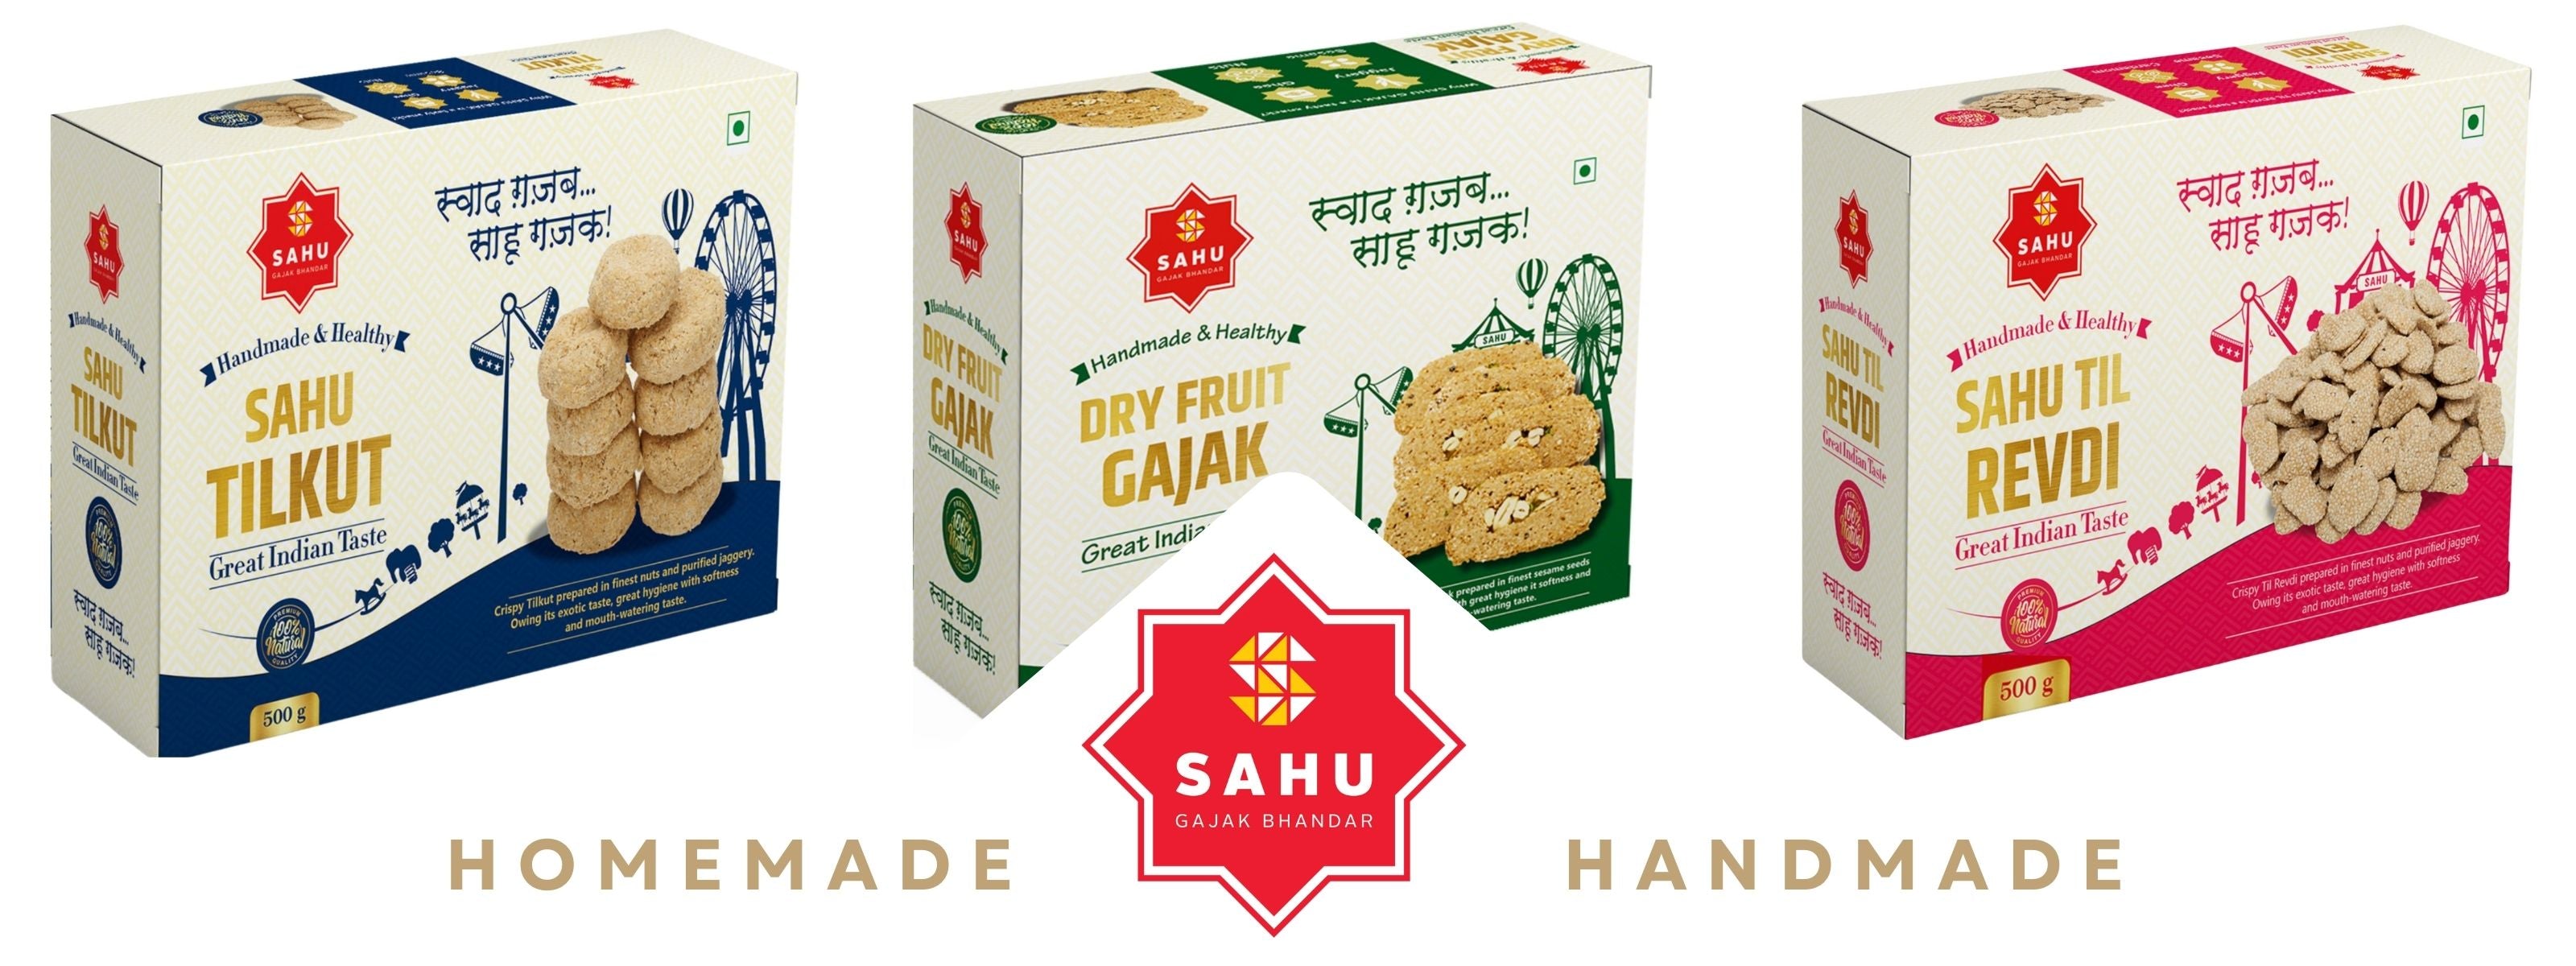 Crunch into Delicious Chikki and More at Sahu Gajak